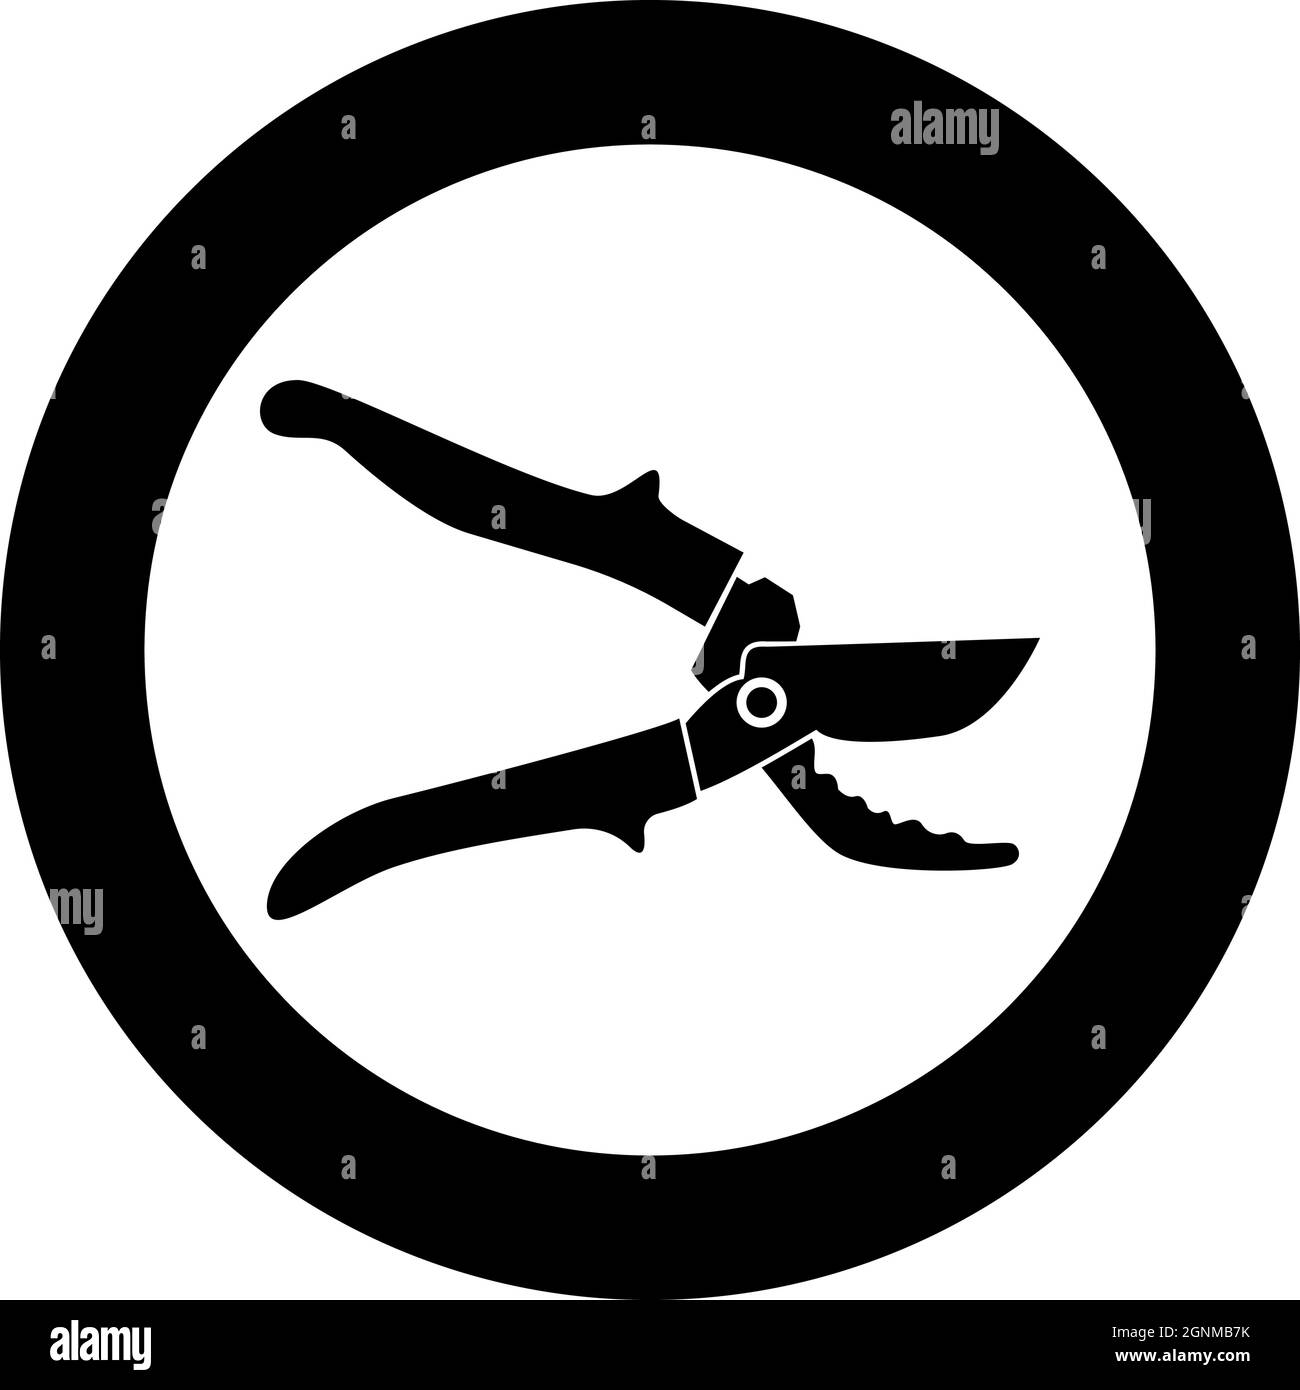 Secateur garden pruner pruning shears Clippers Hand scissors Manual cutting icon in circle round black color vector illustration solid outline style Stock Vector